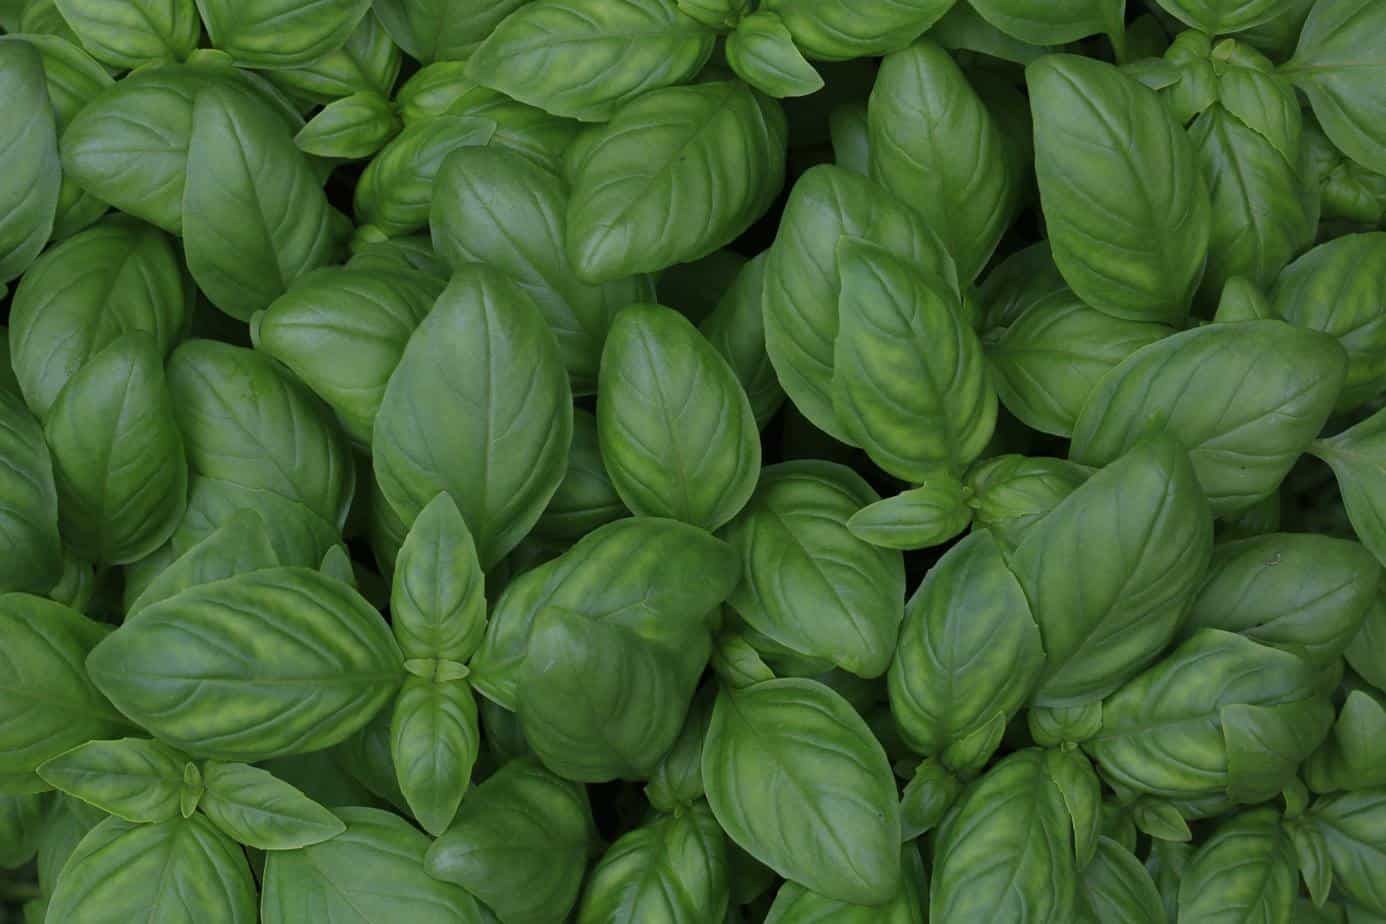 A bunch of basil leaves